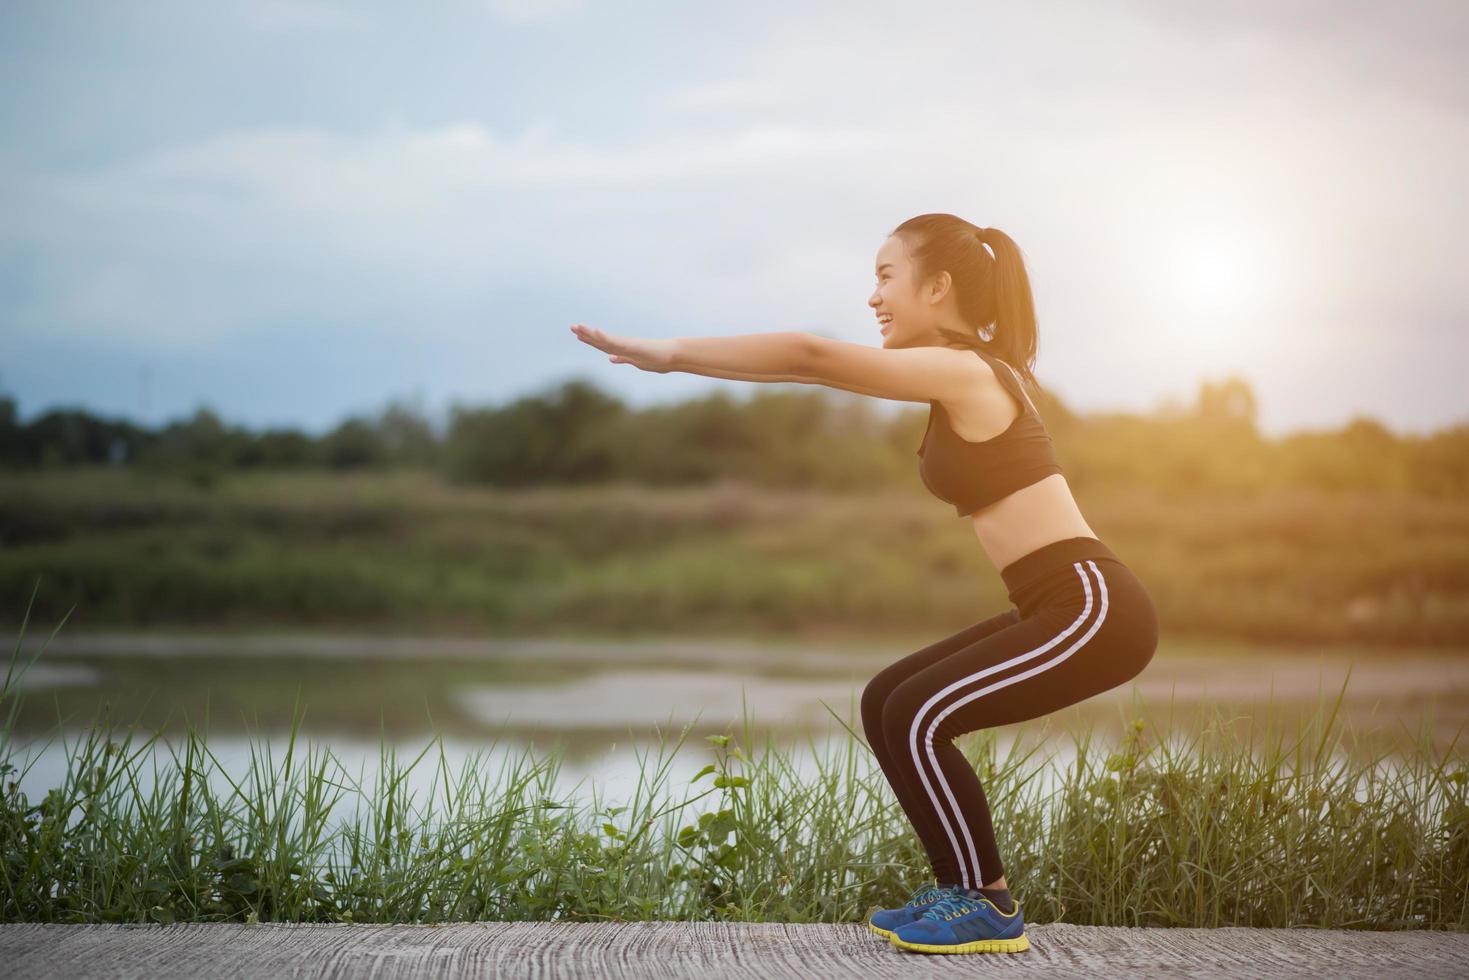 Healthy young woman warming up outdoors for training photo